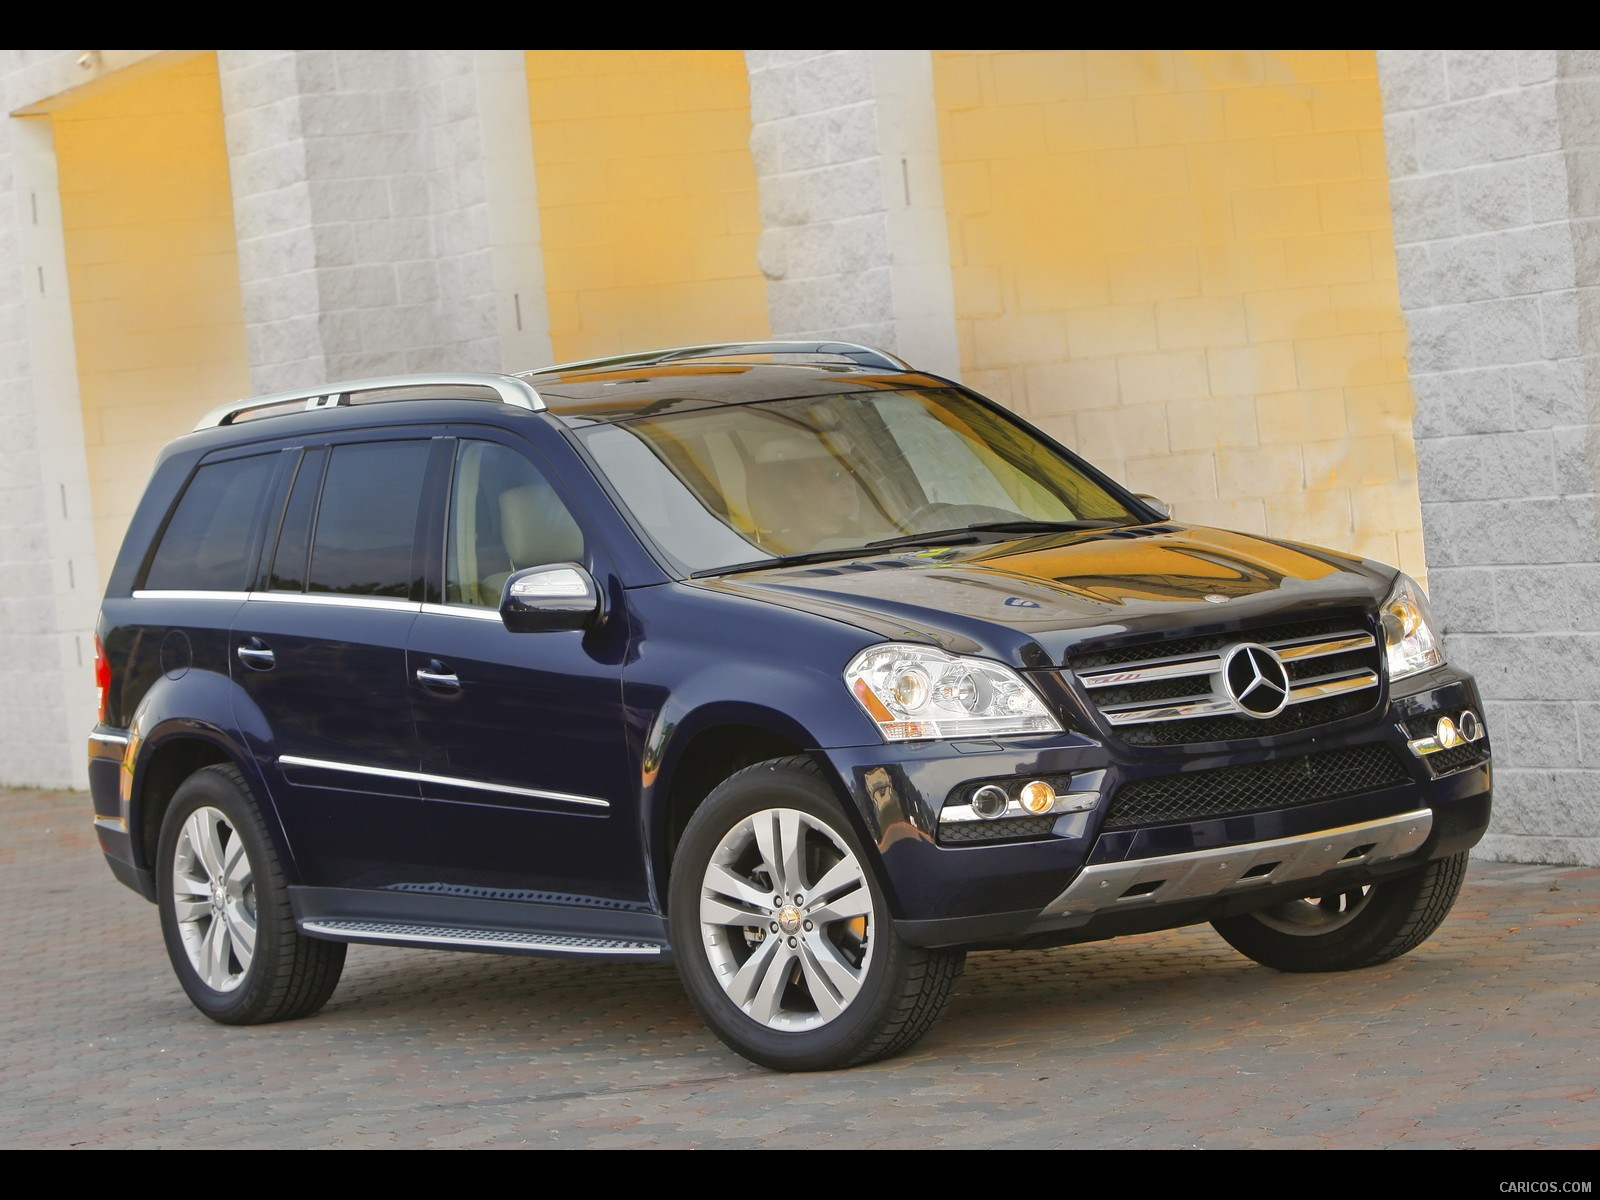 2010 Mercedes-Benz GL450 - Front, #72 of 112